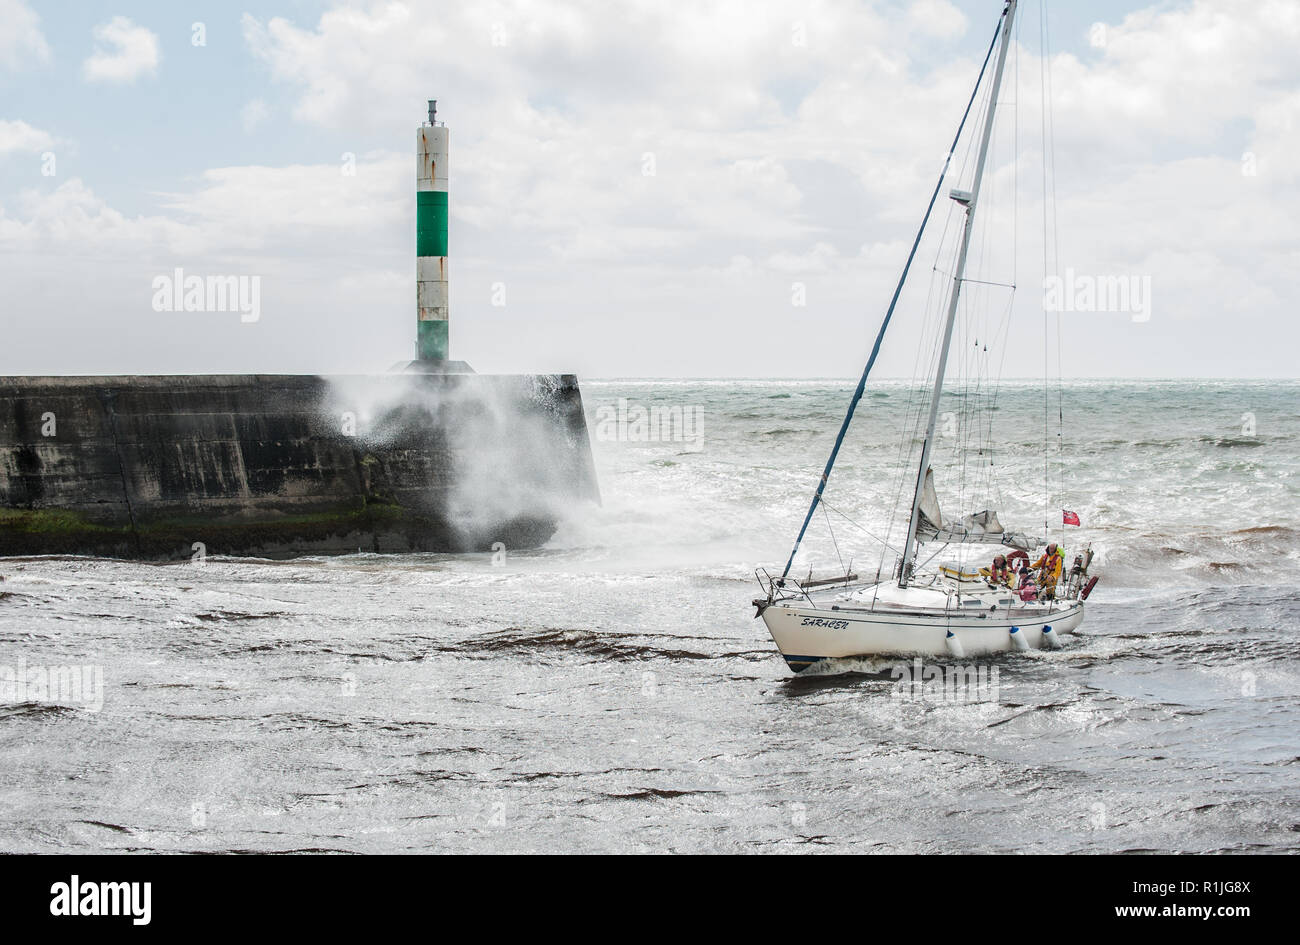 A yacht comes into Aberystwyth harbour to take shelter from the stormy seas. Stock Photo